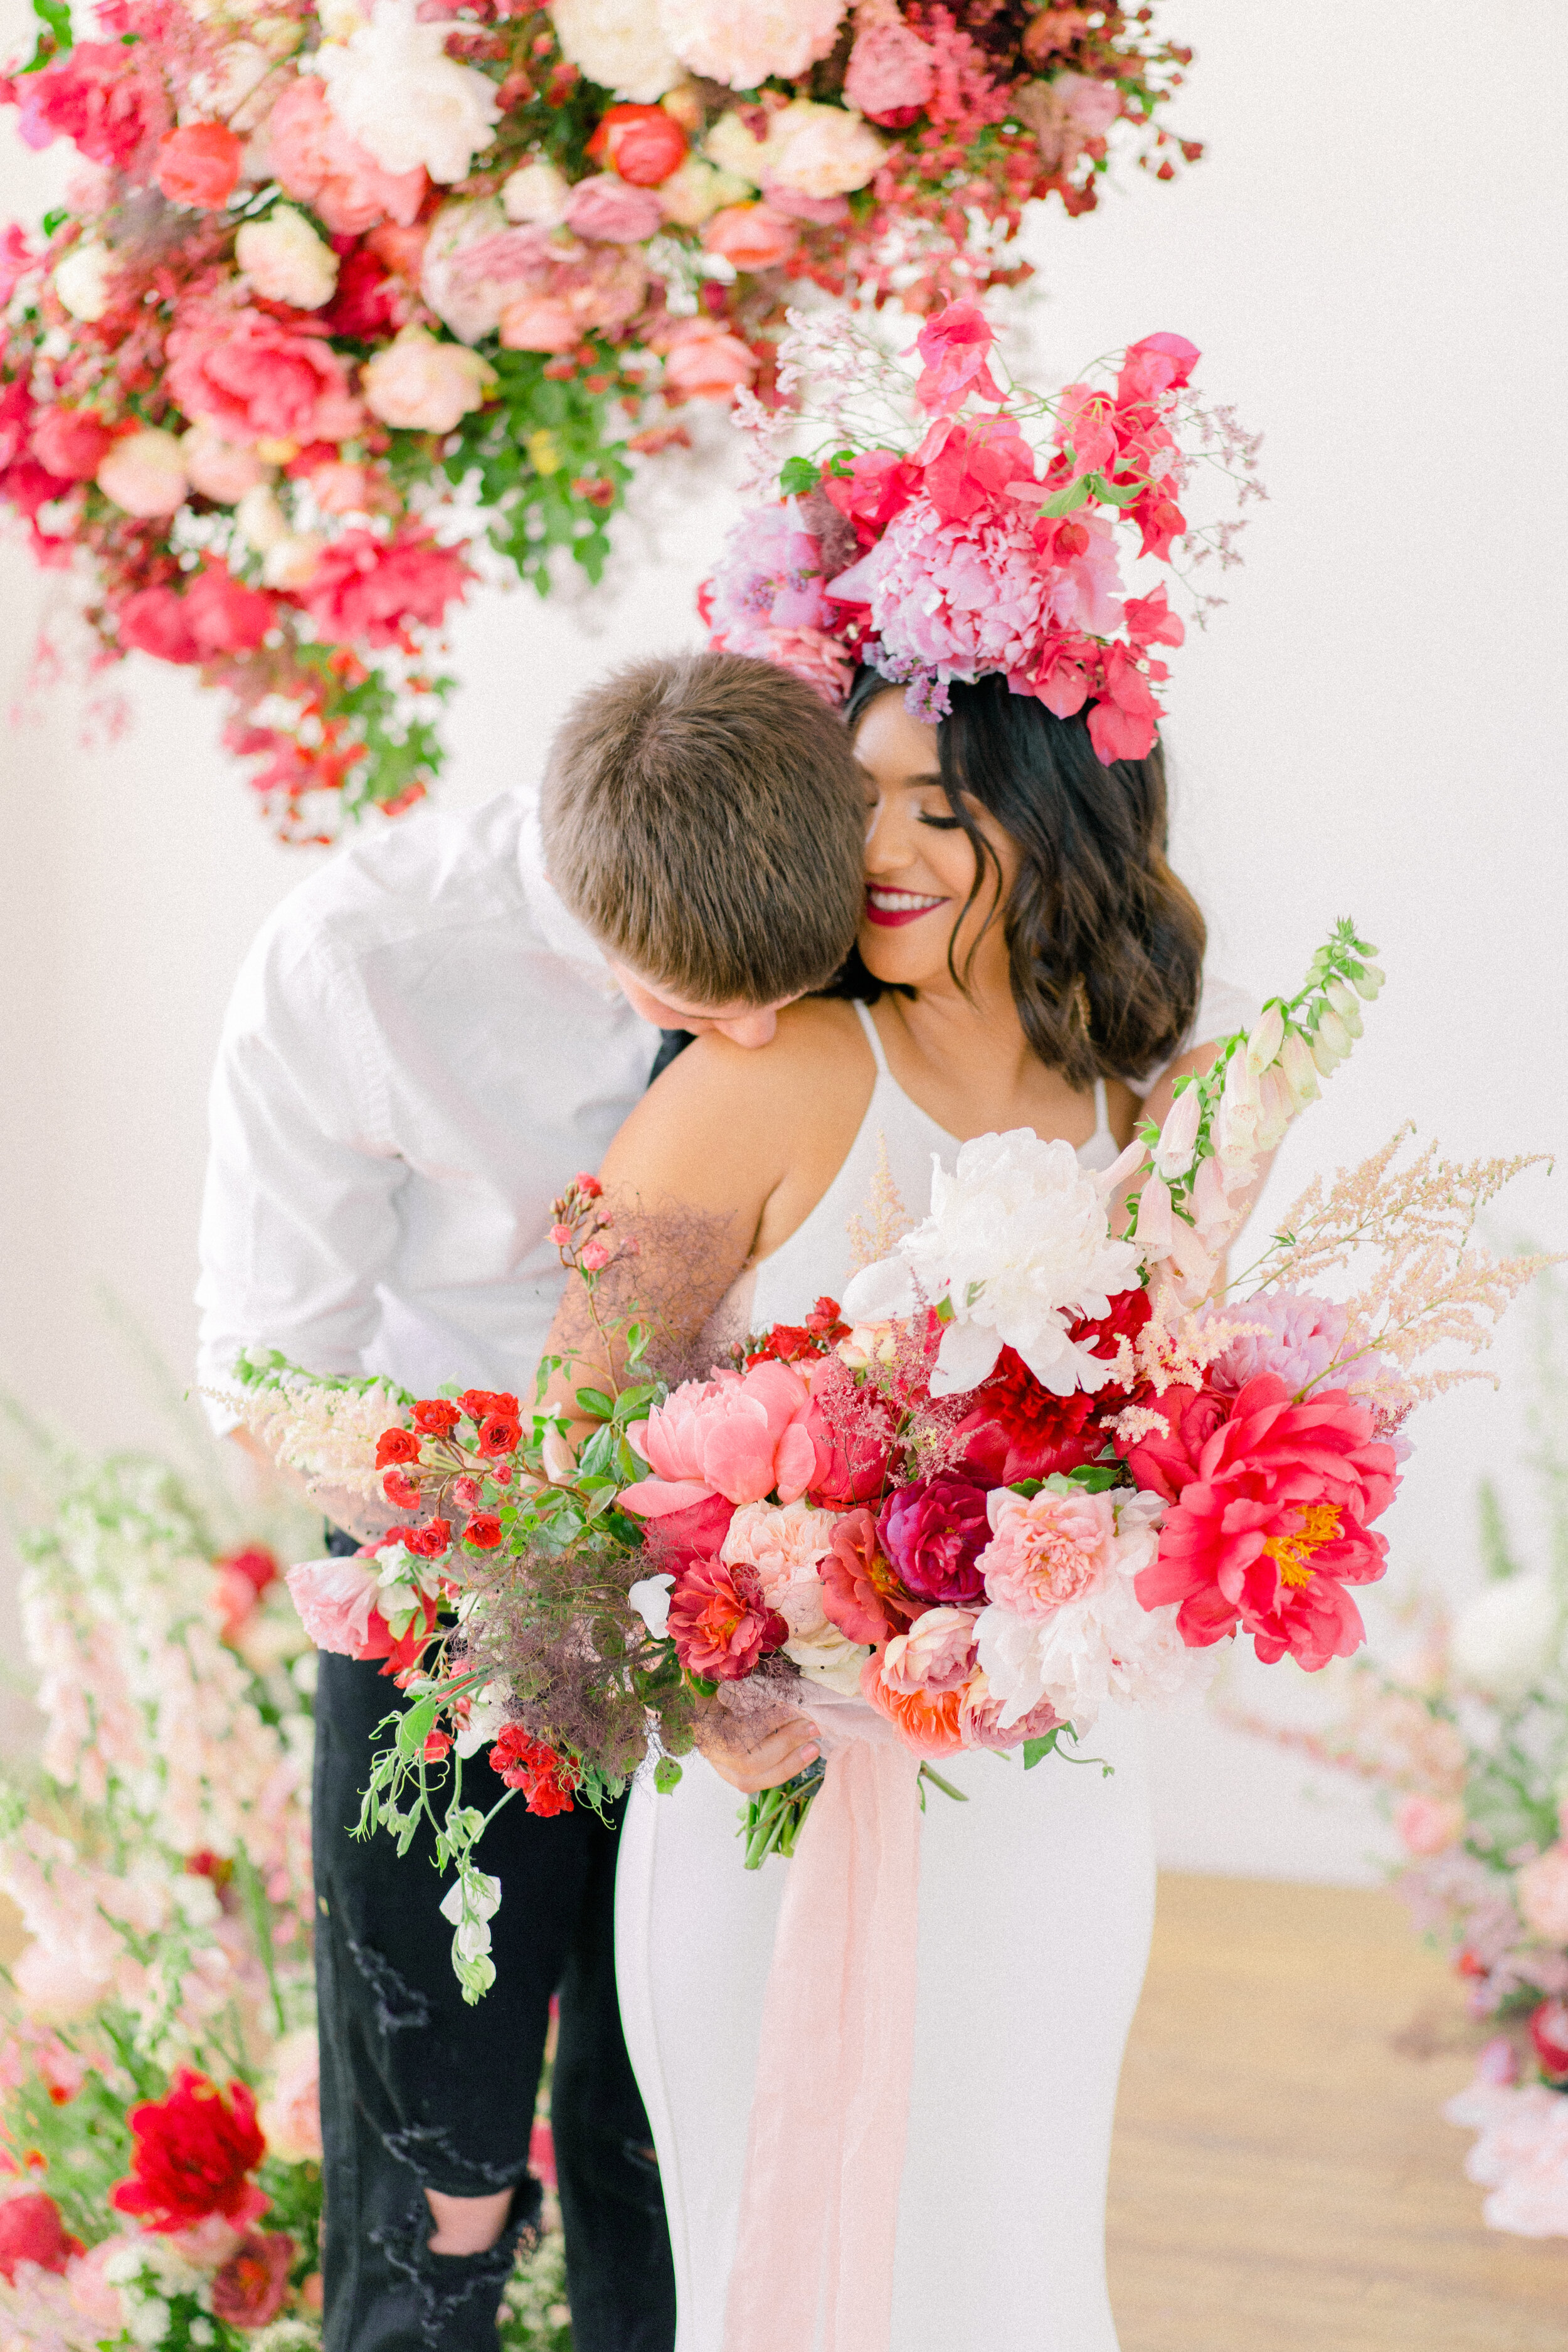 A Romantic Wedding Elopement Filled with Colorful Fuchsia - Sarahi Hadden Submission-91.jpg